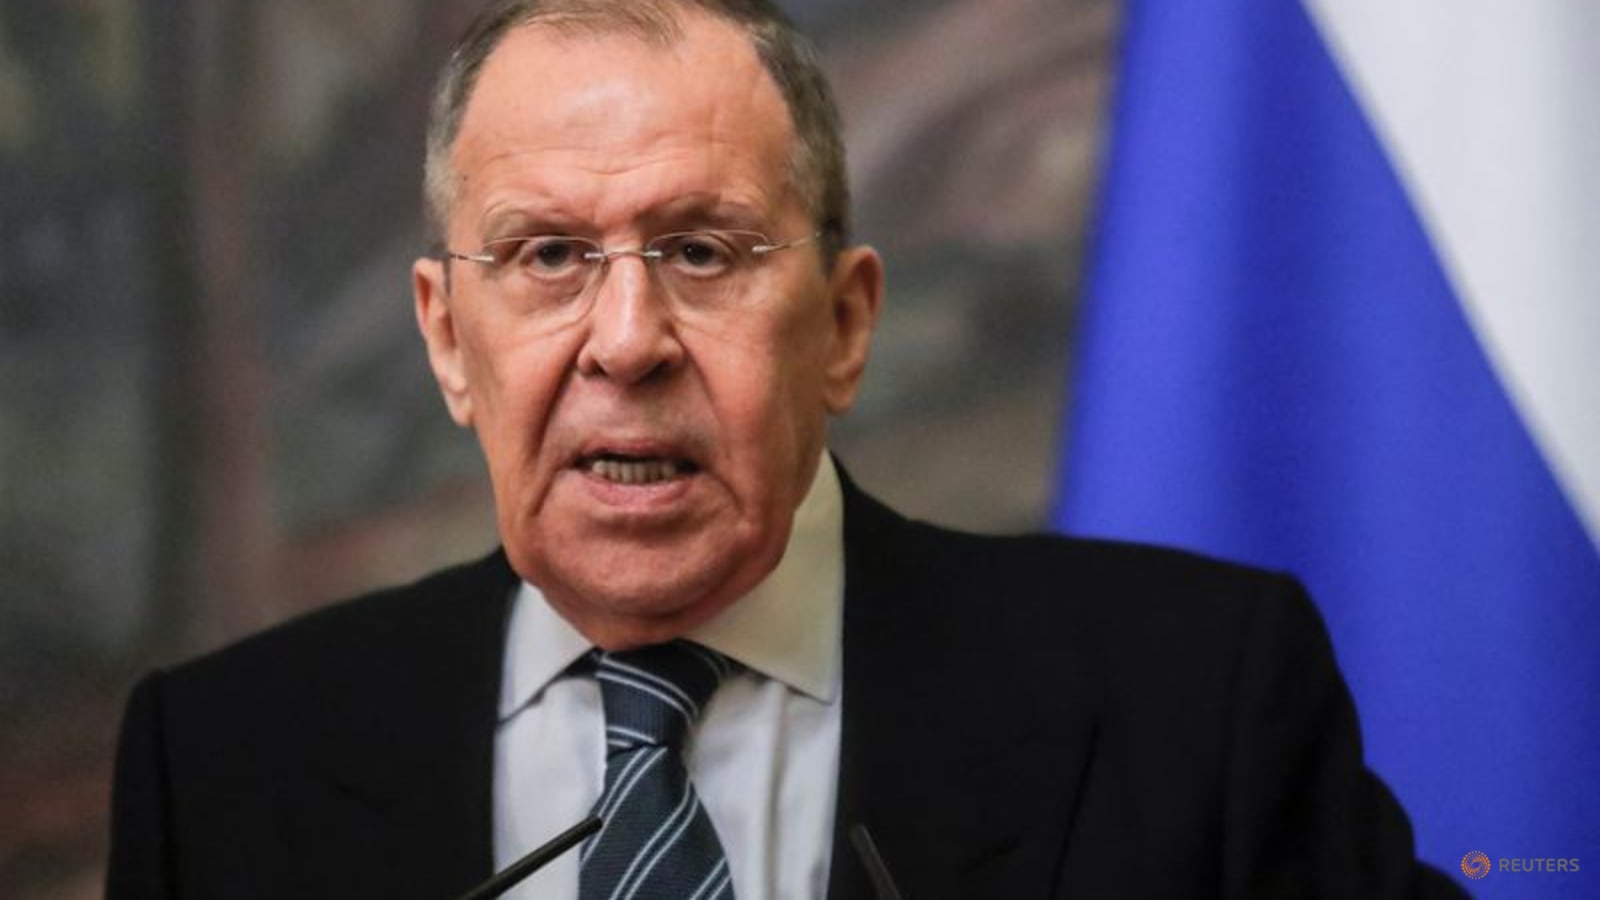 mali-says-russia's-lavrov-to-visit-to-strengthen-defence-ties